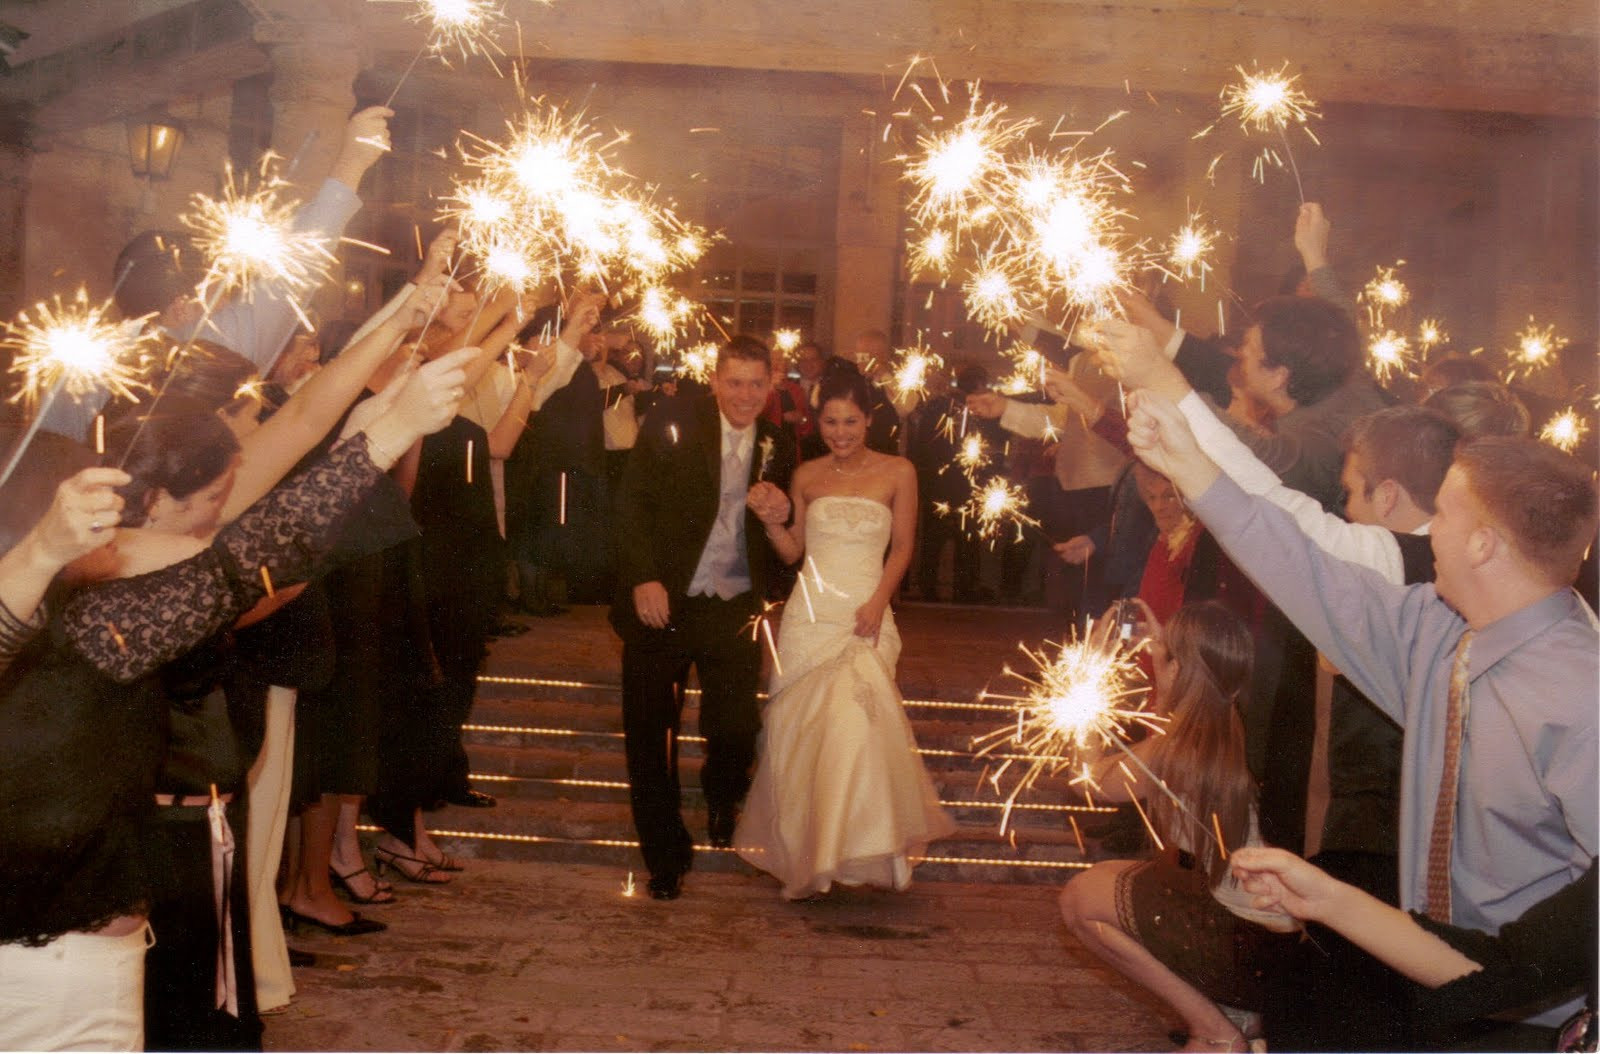 Wedding Pictures With Sparklers
 Wedding sparklers Lighting up the party